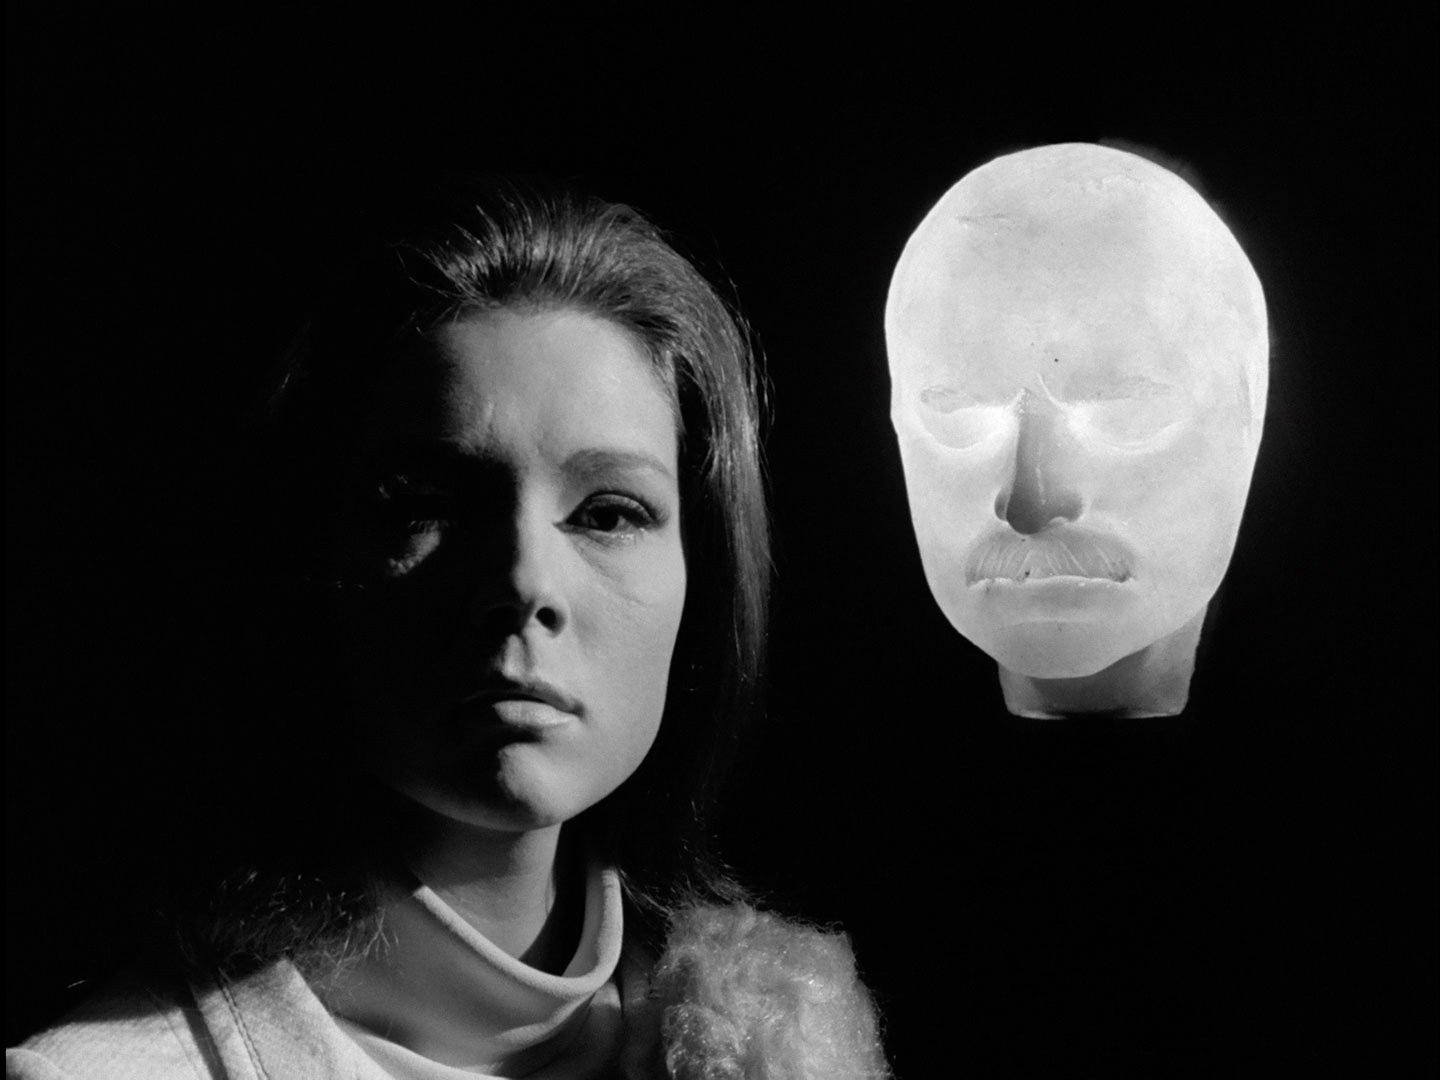 Mrs Peel with an illuinated mask